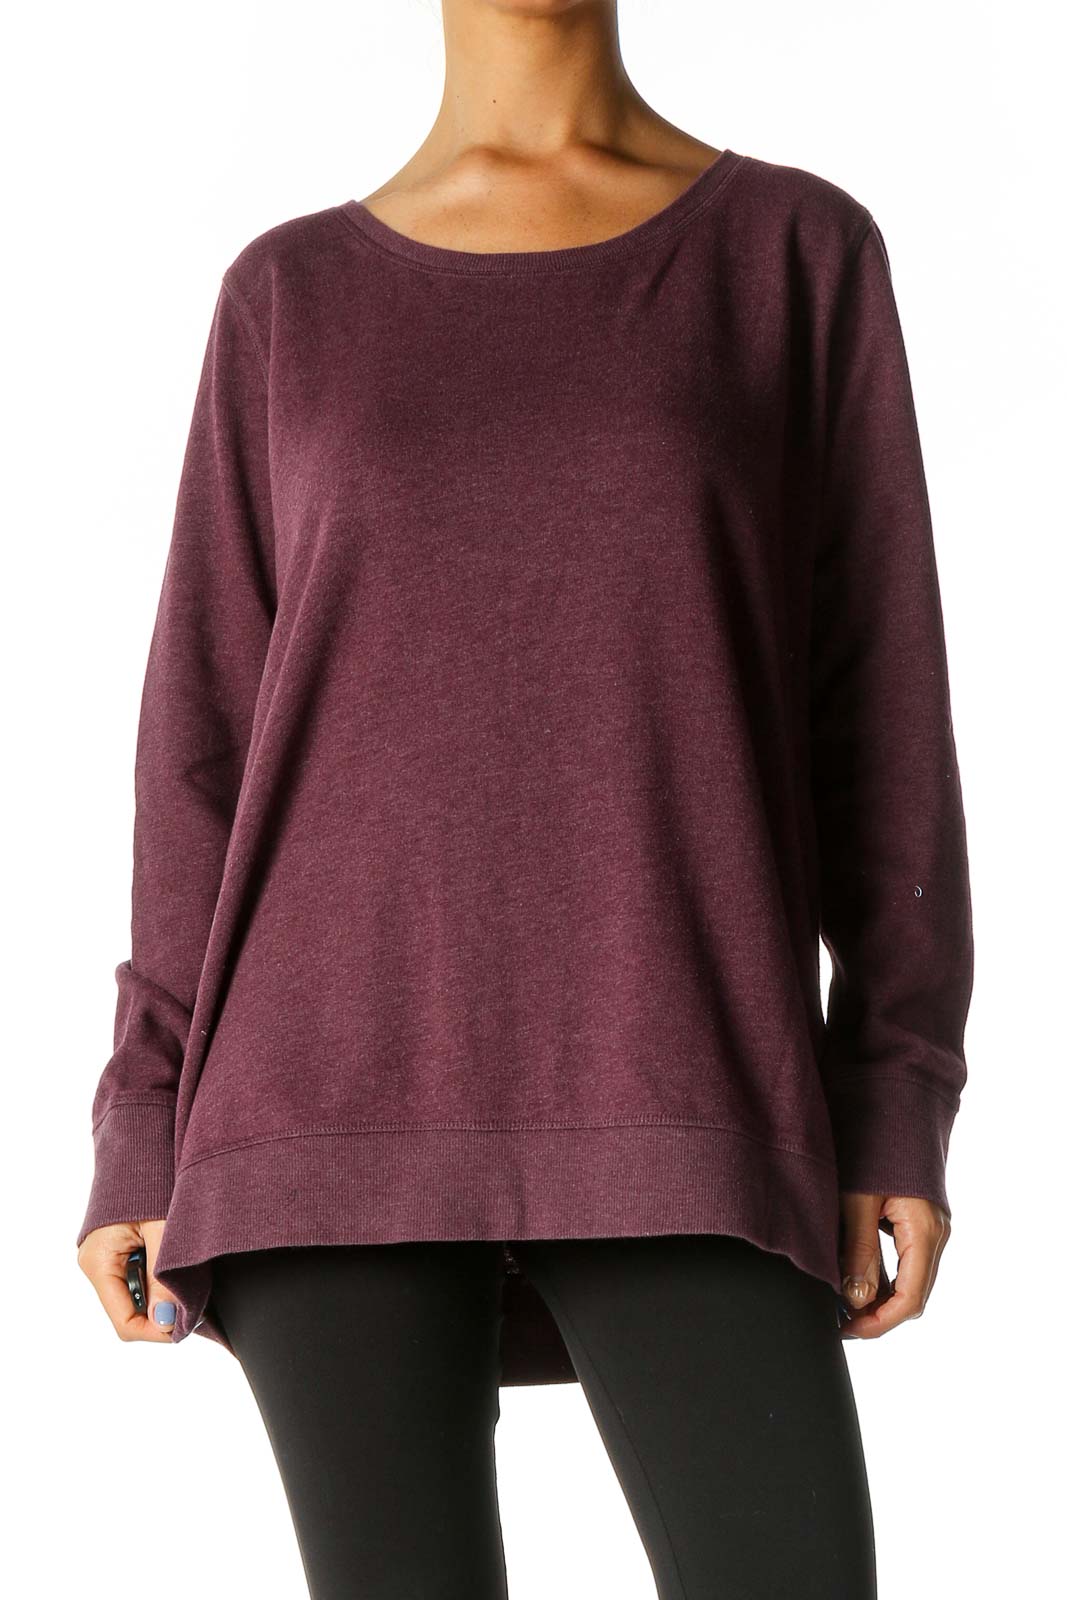 Purple Solid Casual Sweater Front